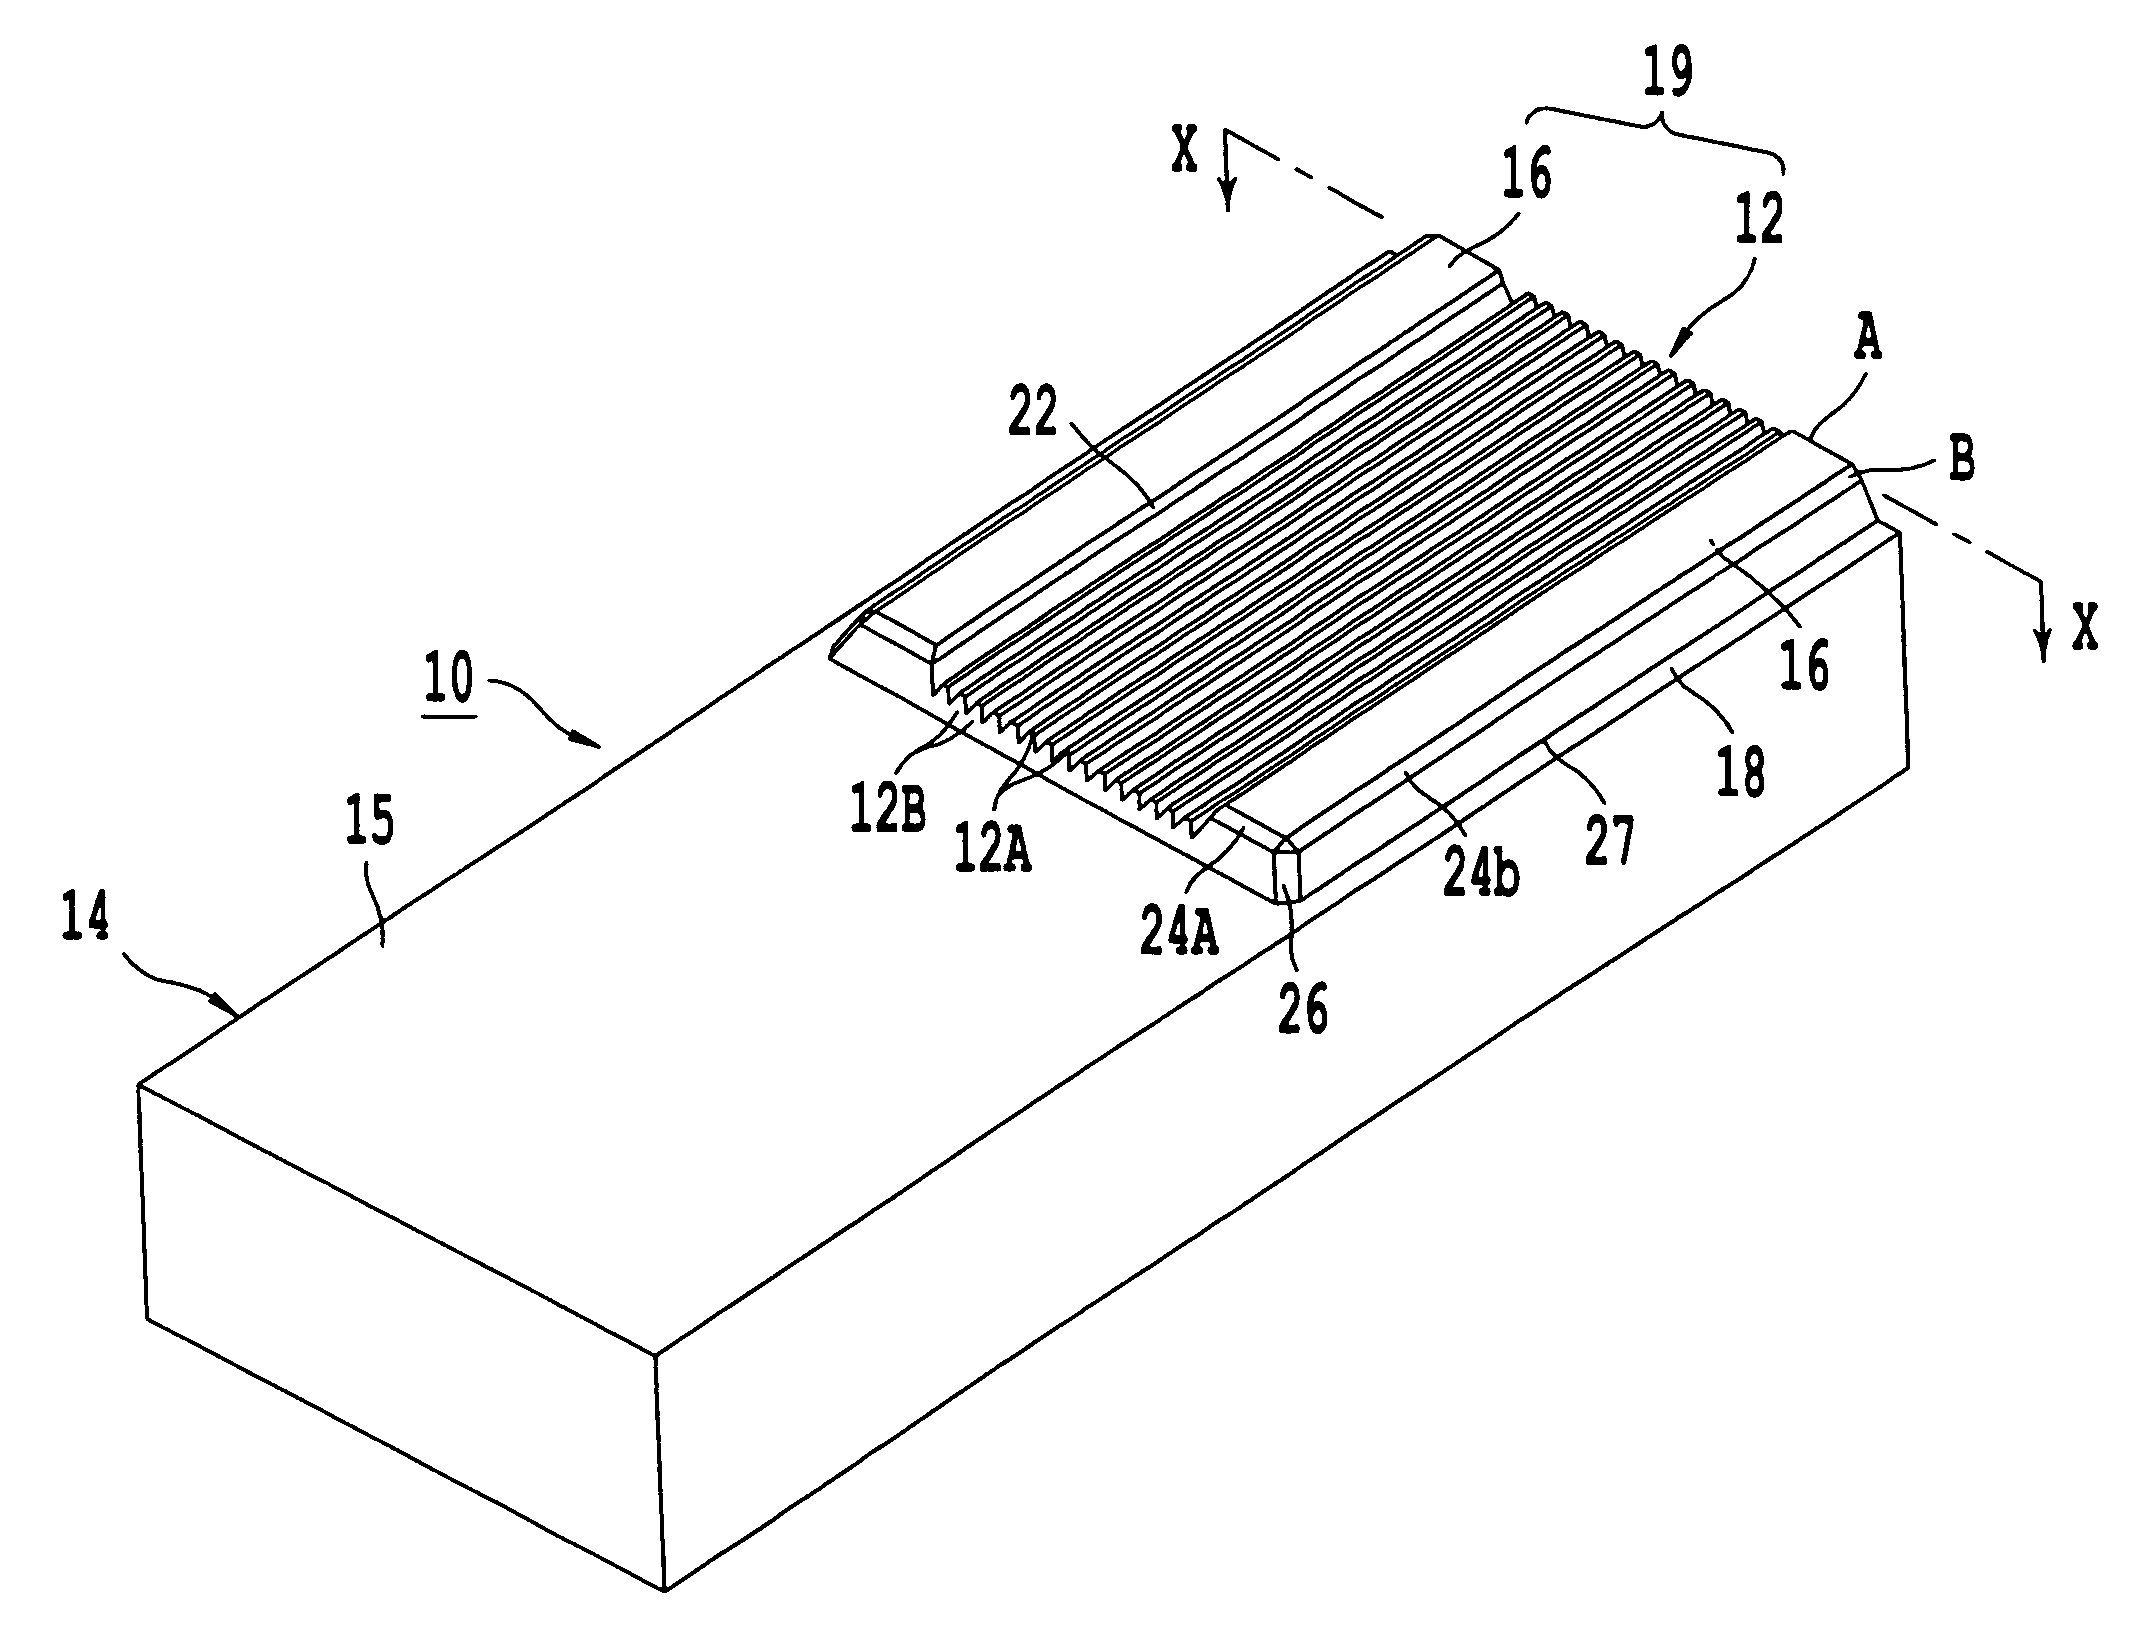 Glass substrate having a grooved portion, method for fabricating the same, and press mold for fabricating the glass substrate